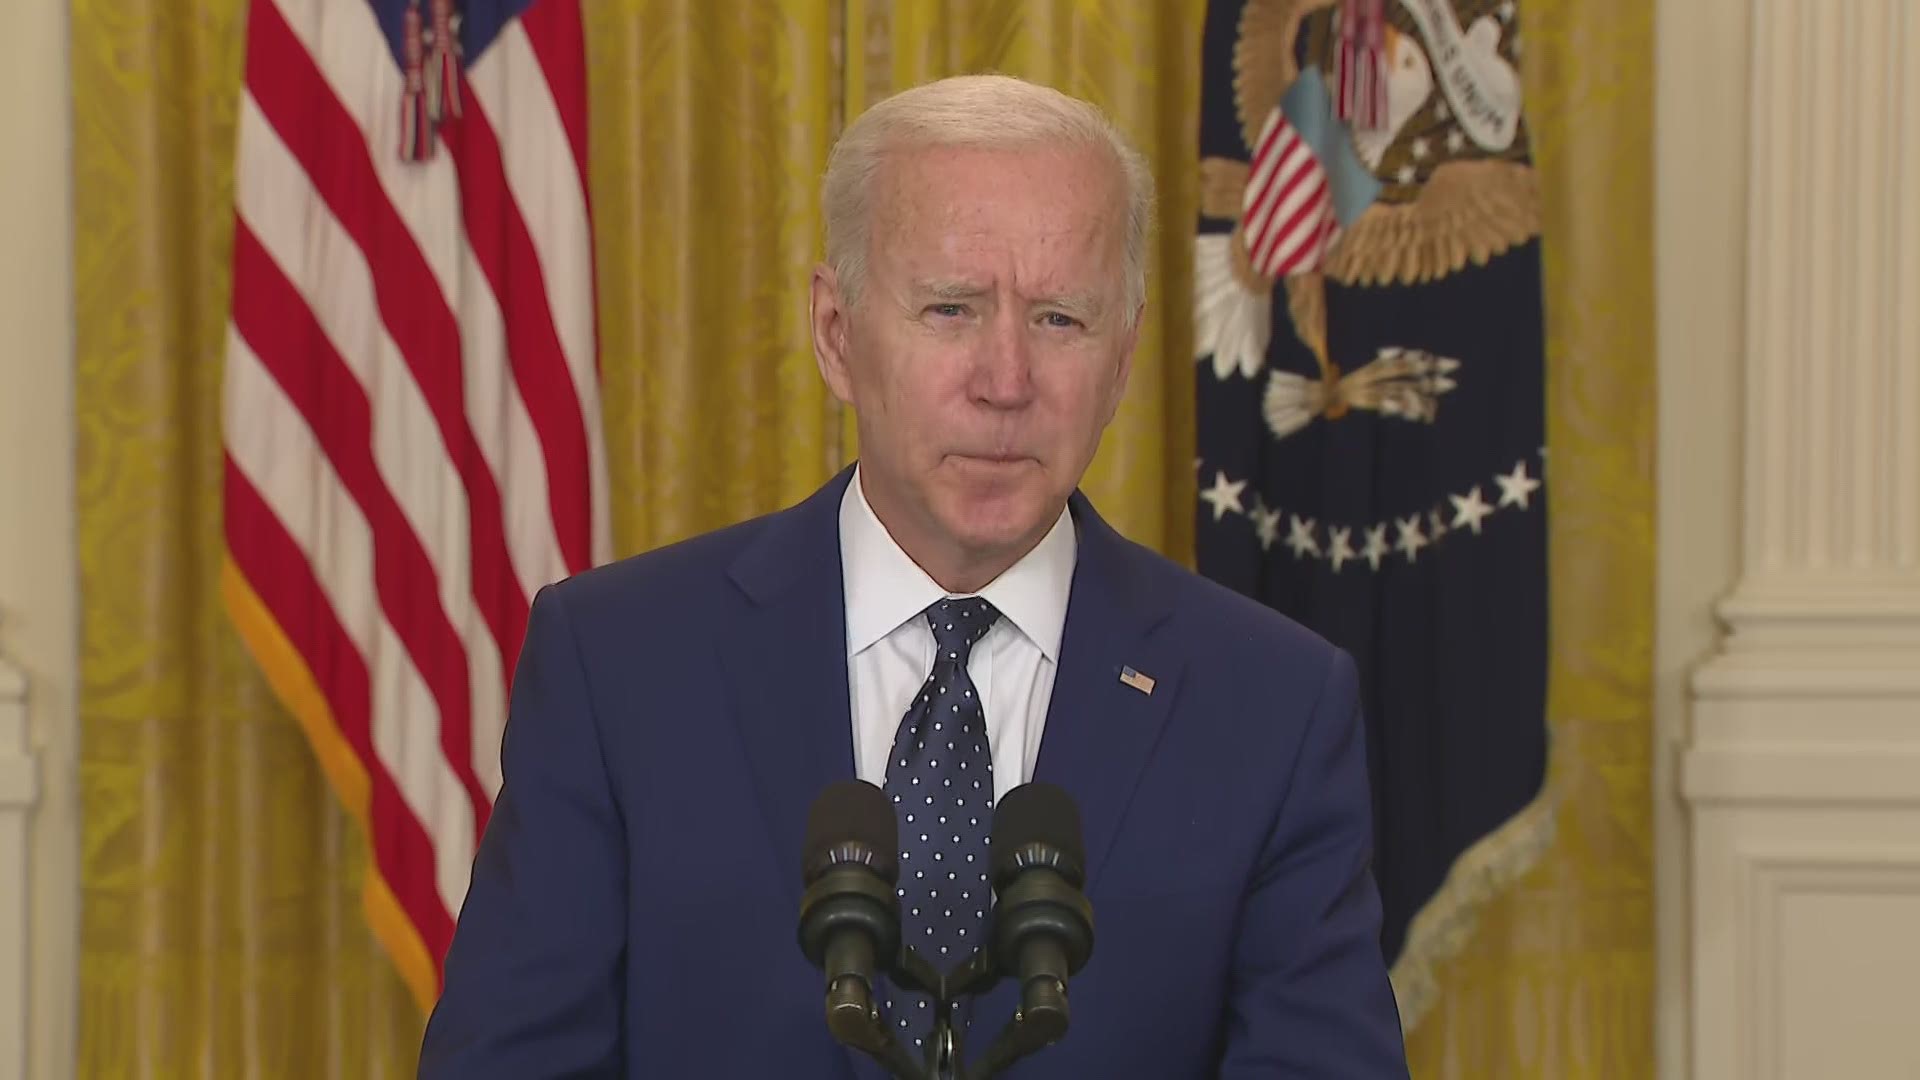 President Joe Biden said Thursday he spoke with Russian Vladimir Putin earlier this week and says he hopes to meet the Russian leader in Europe this summer.